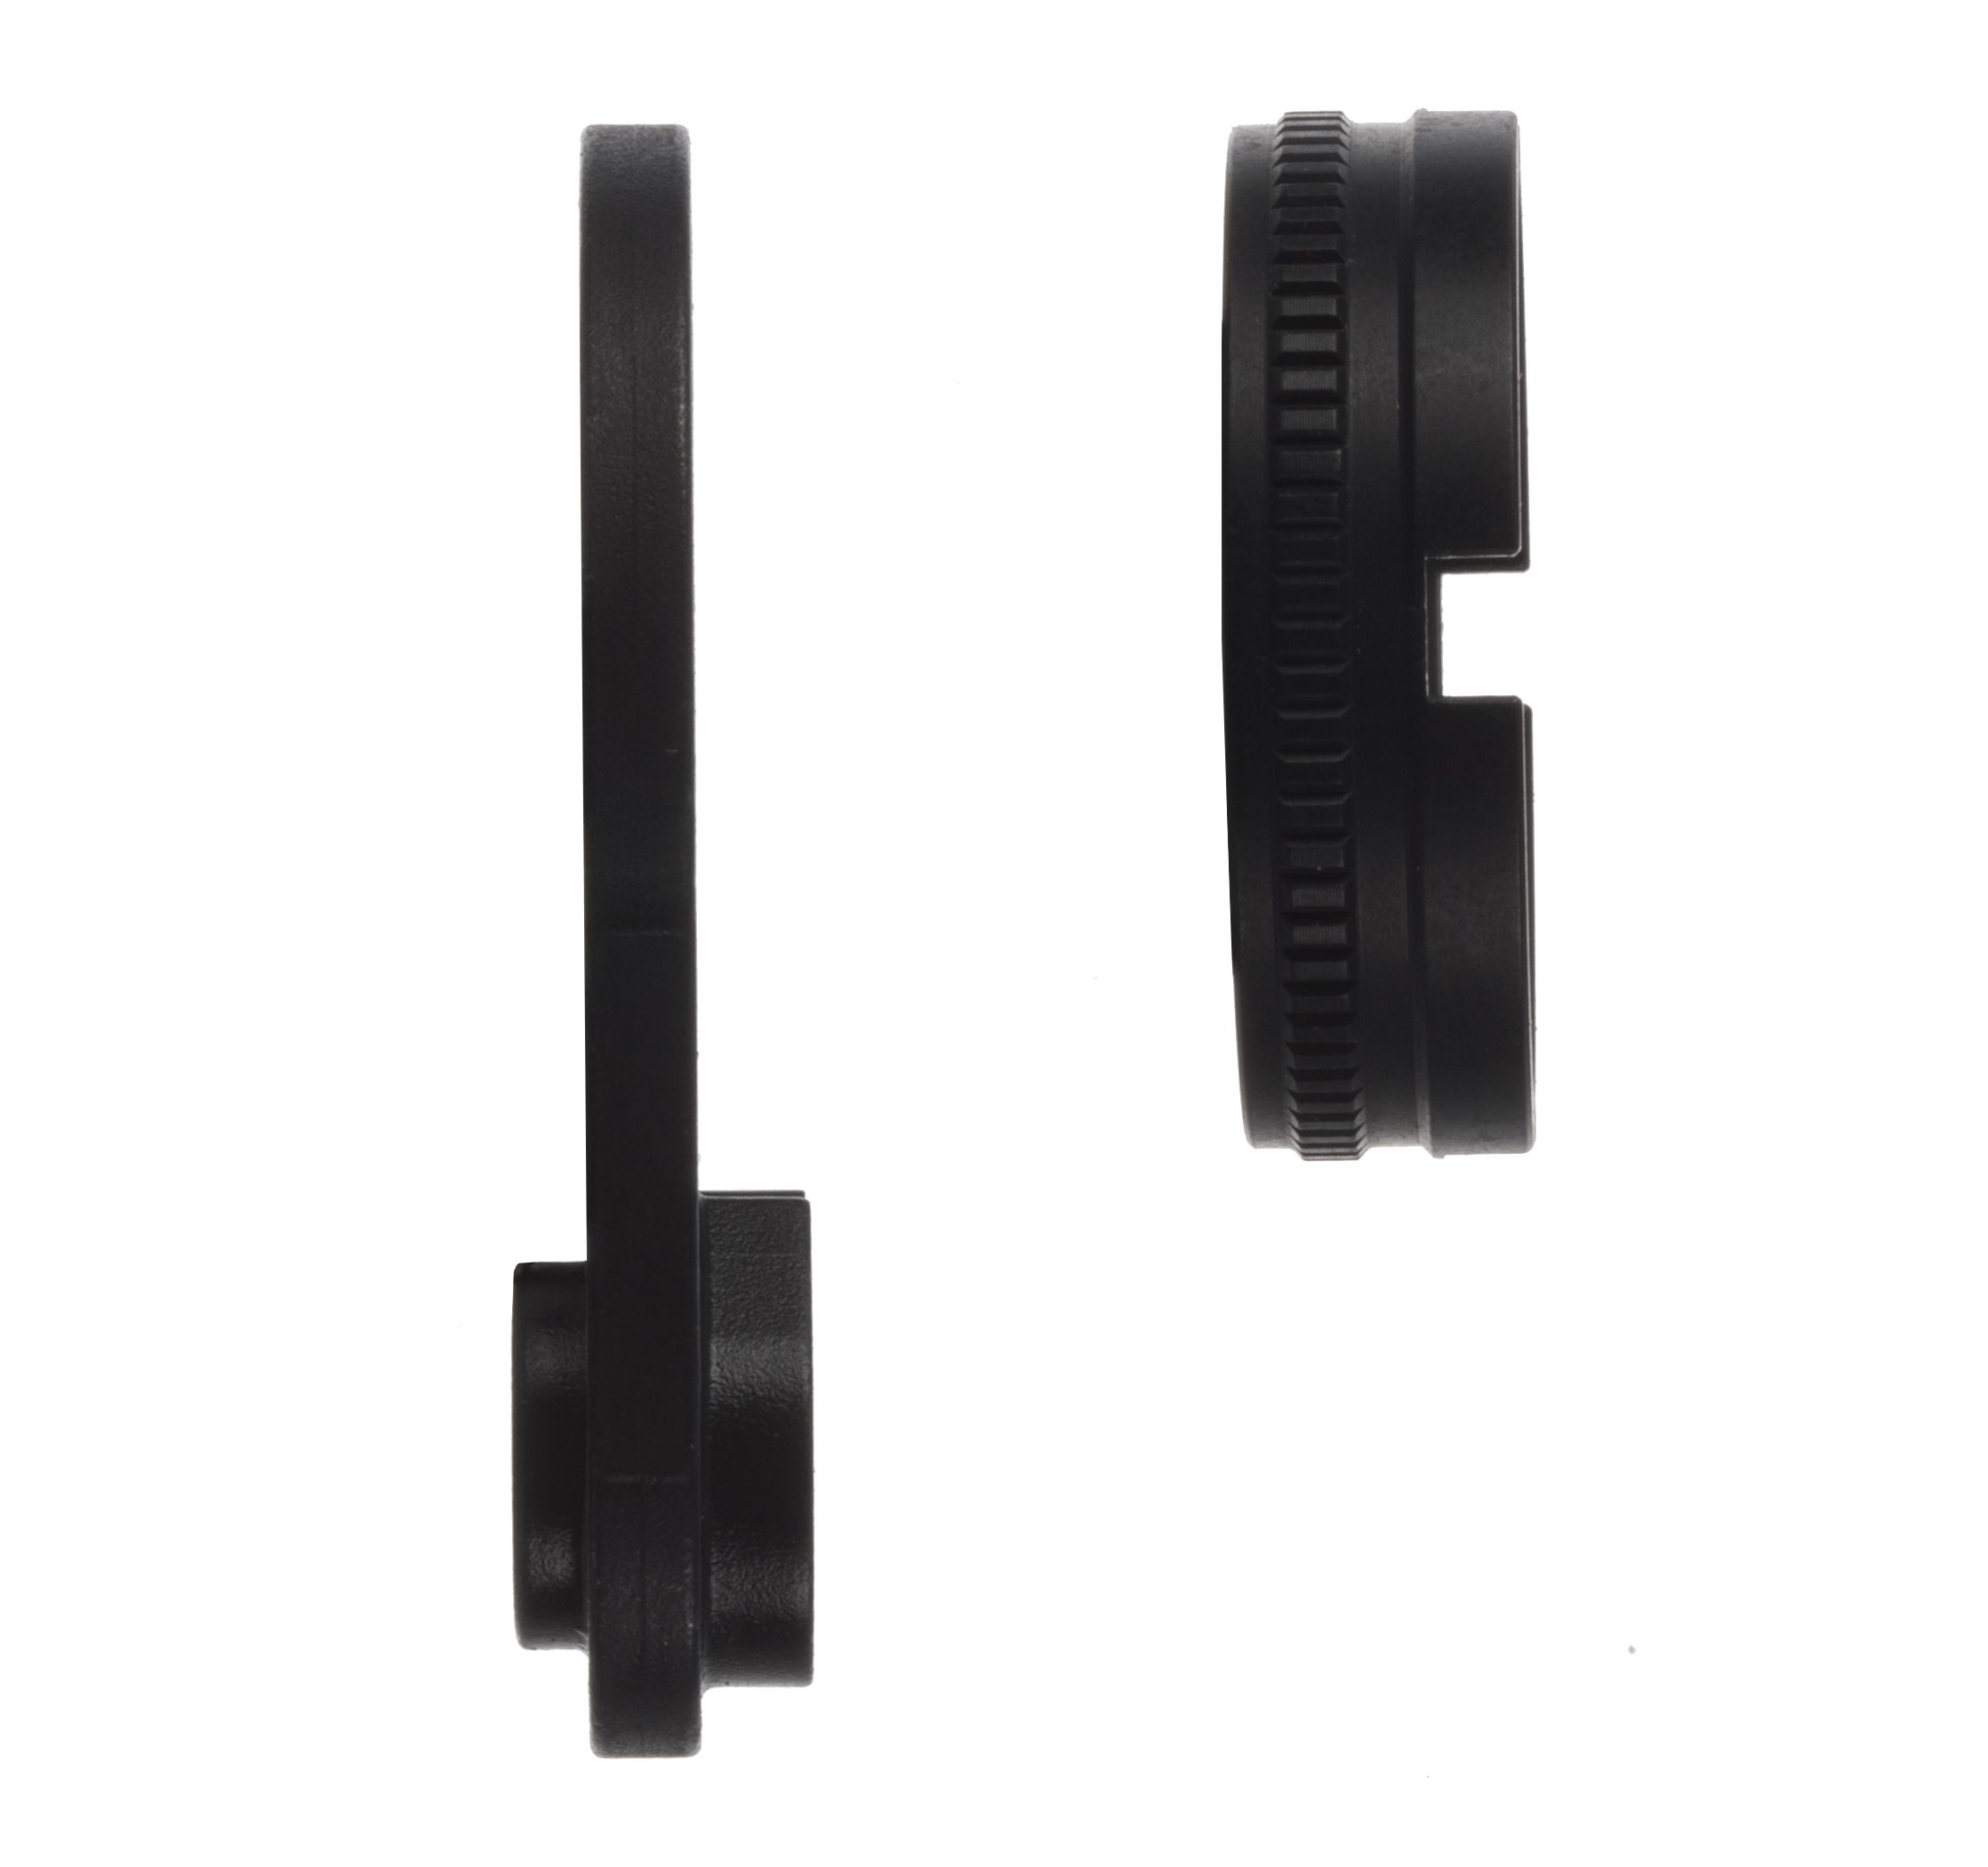 Primary Weapons Systems Ratchet Lock Castle Nut and Endplate Set 